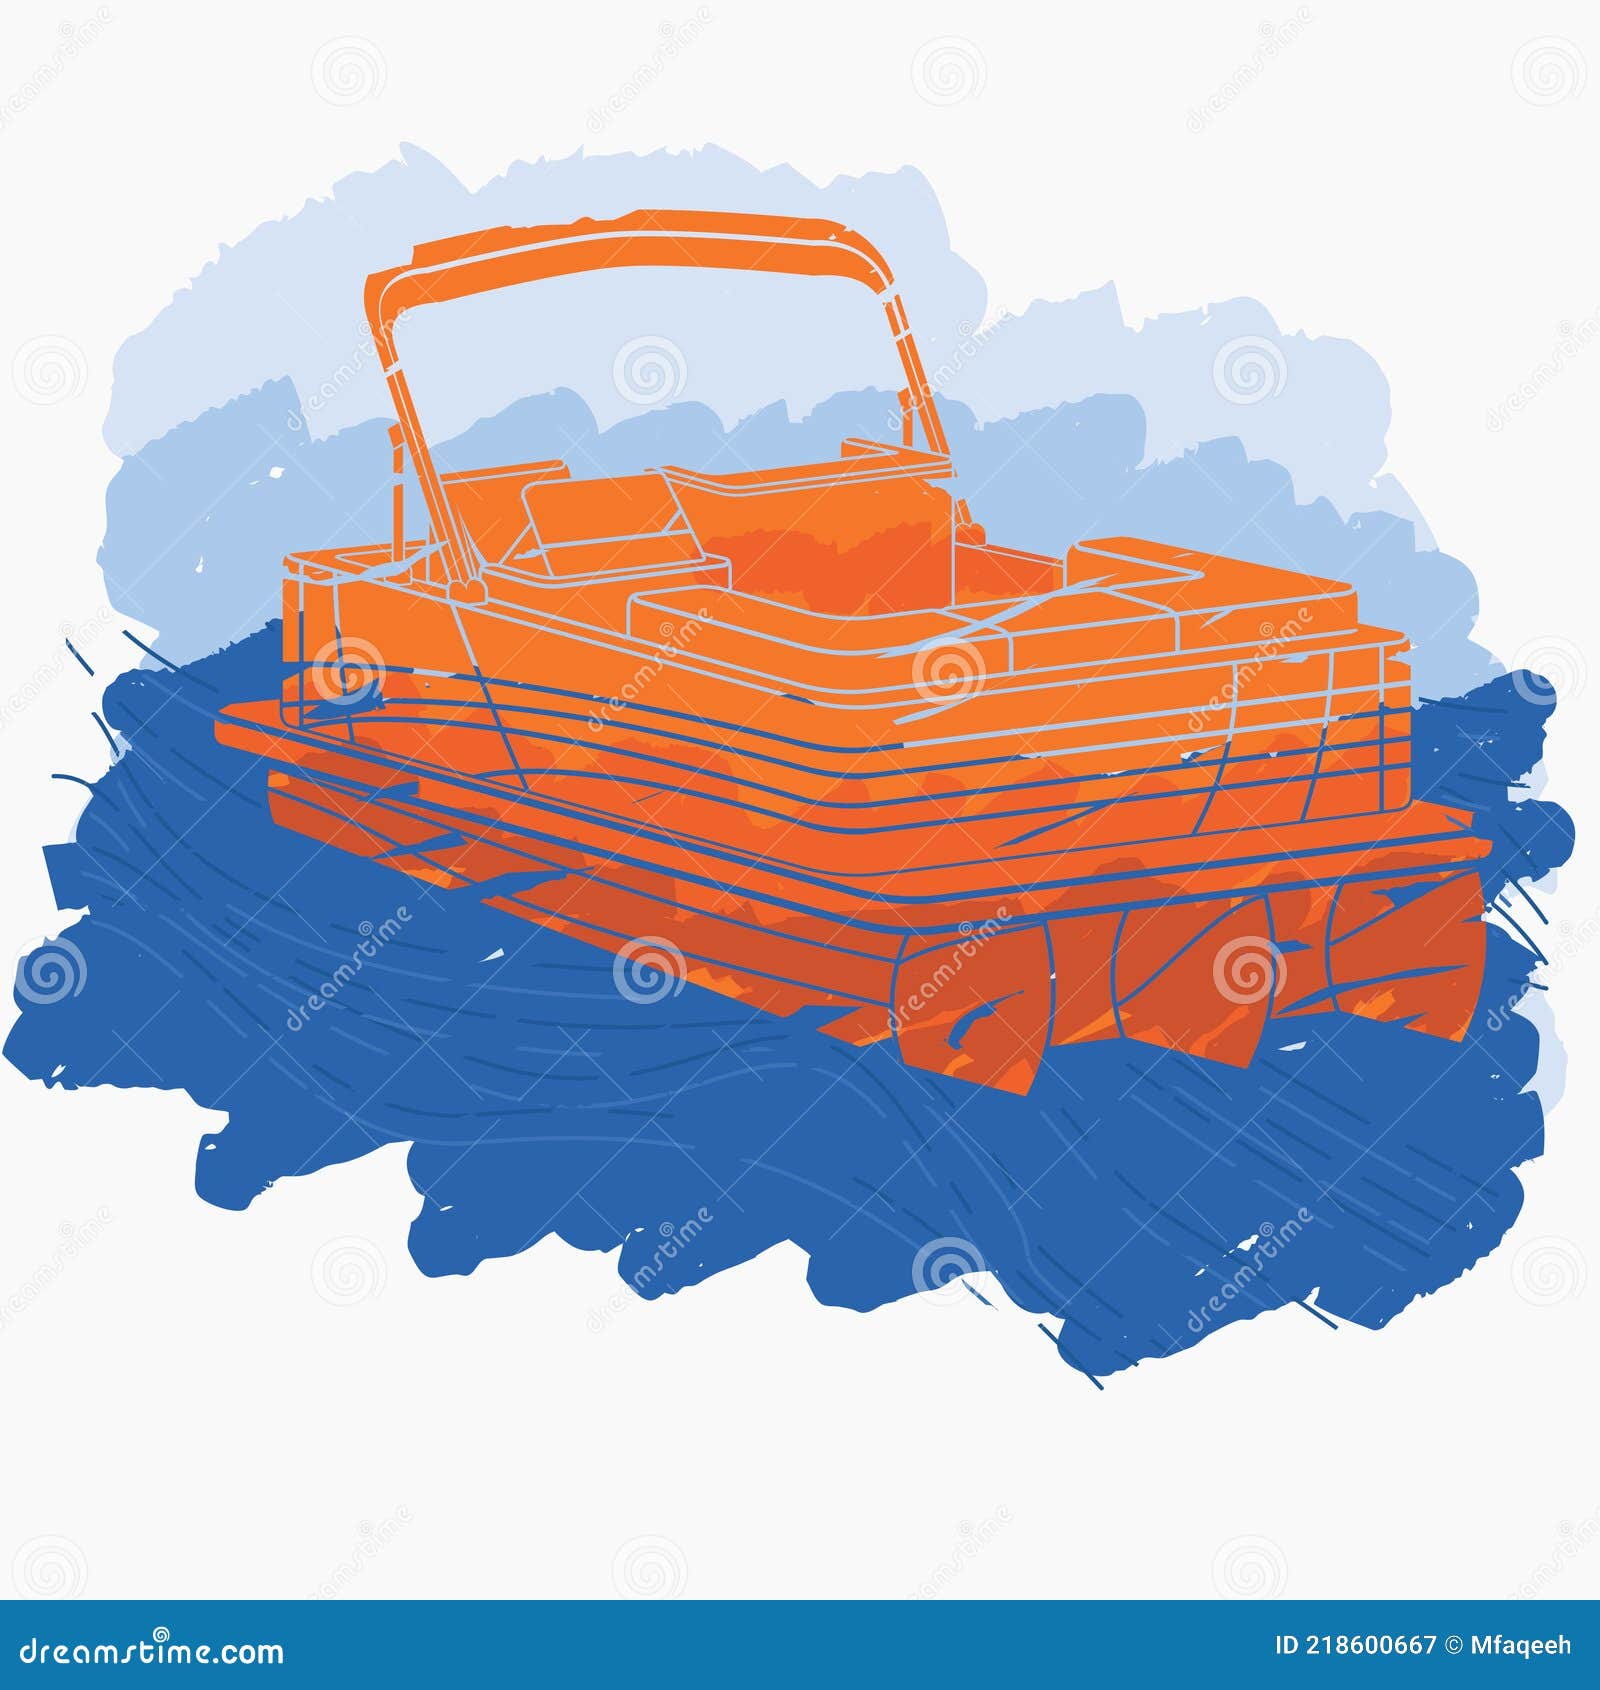 brush strokes top oblique pontoon boat on water  